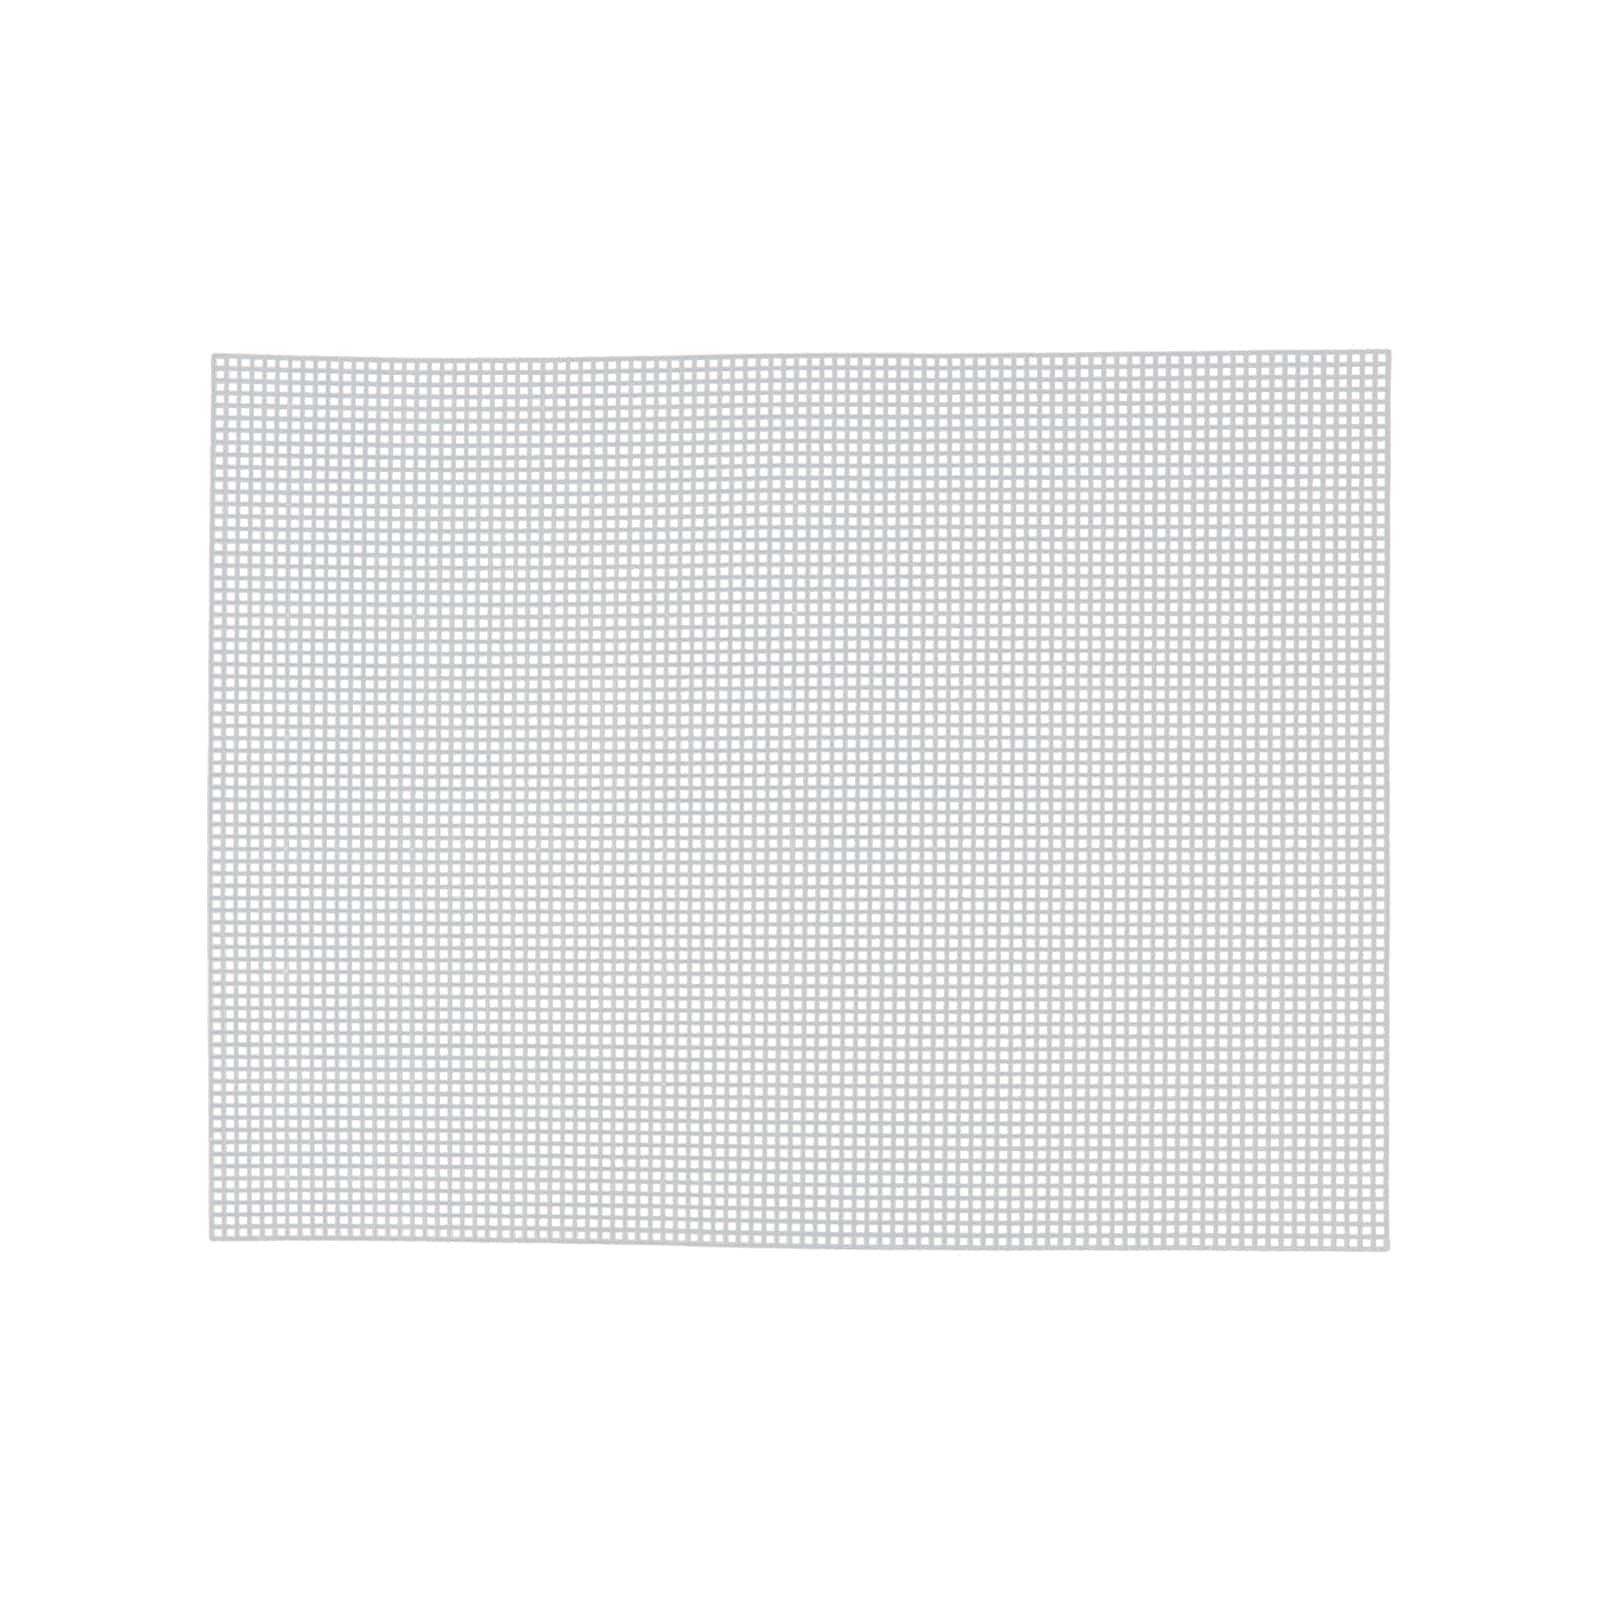 20 Sheets Plastic Canvas, 7CT Clear Plastic Mesh Canvas Sheets for